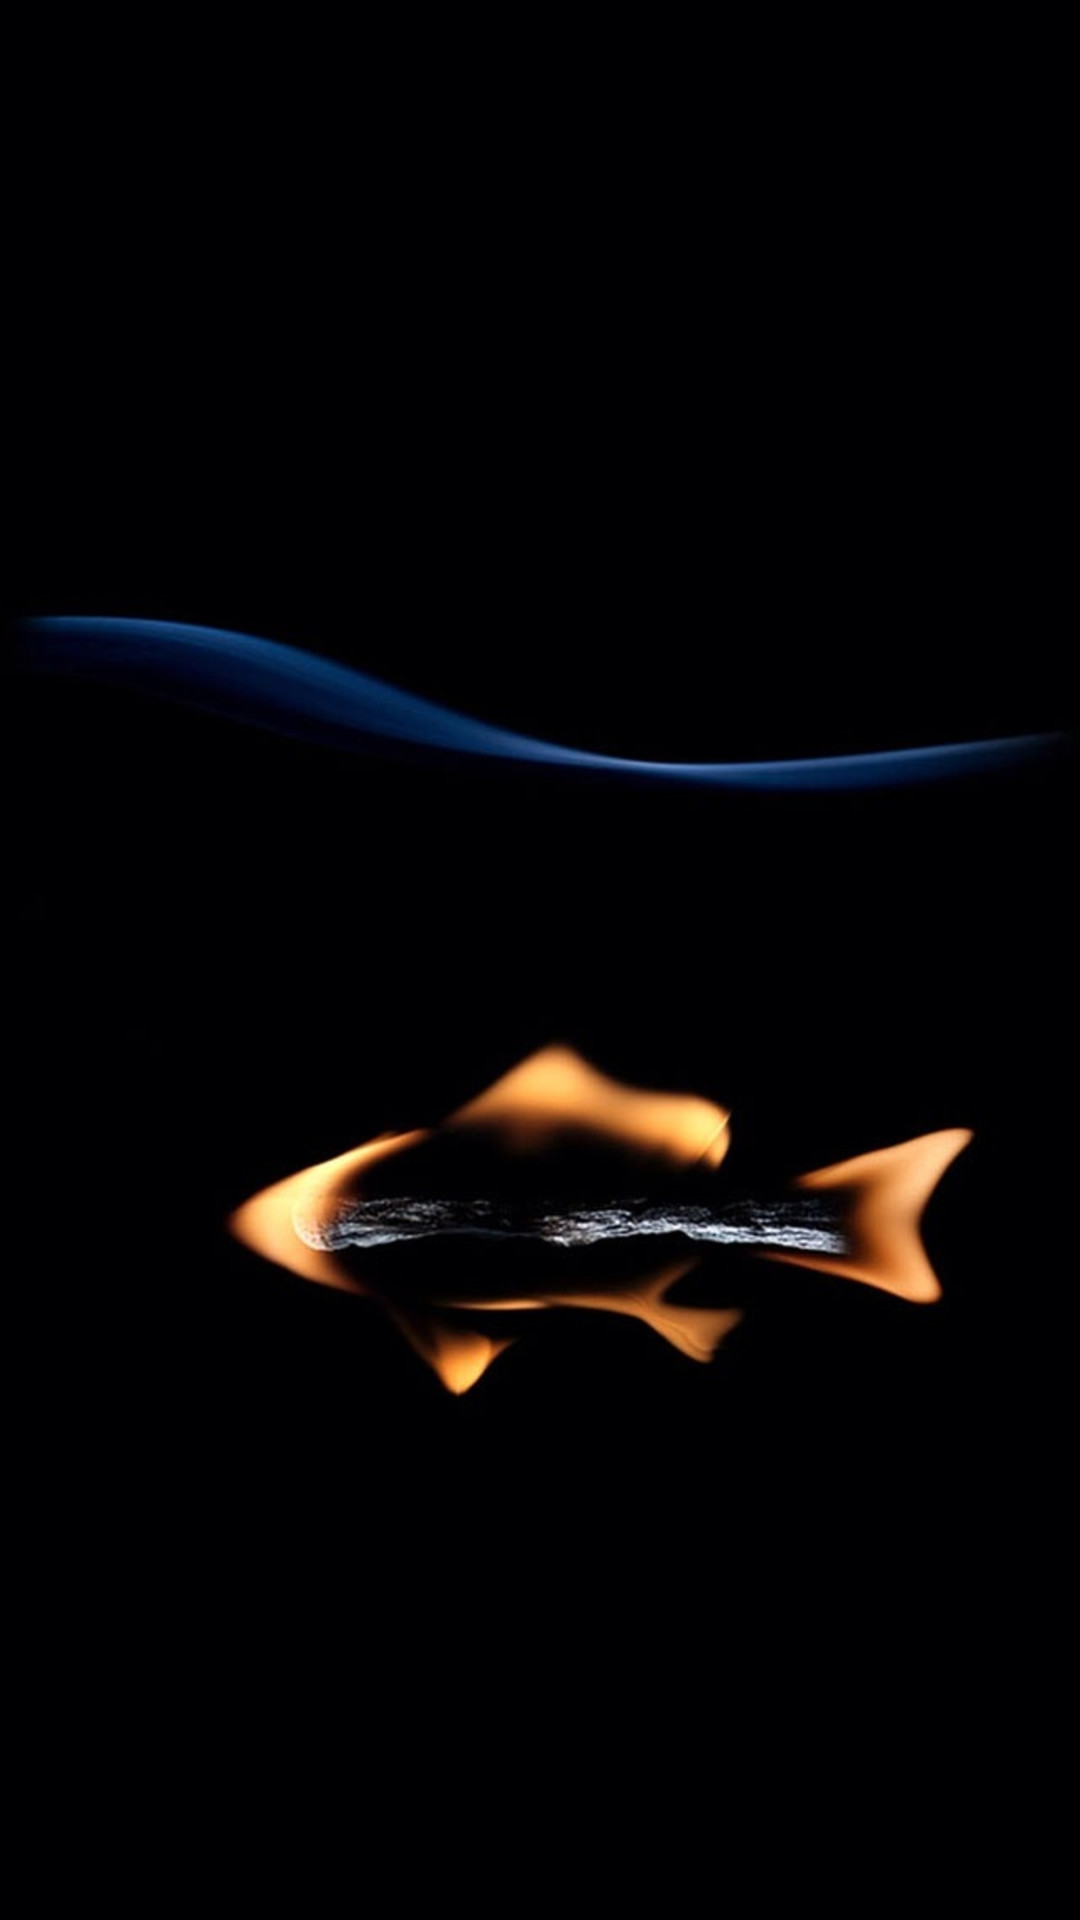 1080x1920 Abstract Fish Match Ash Art iphone 7 Pictures.